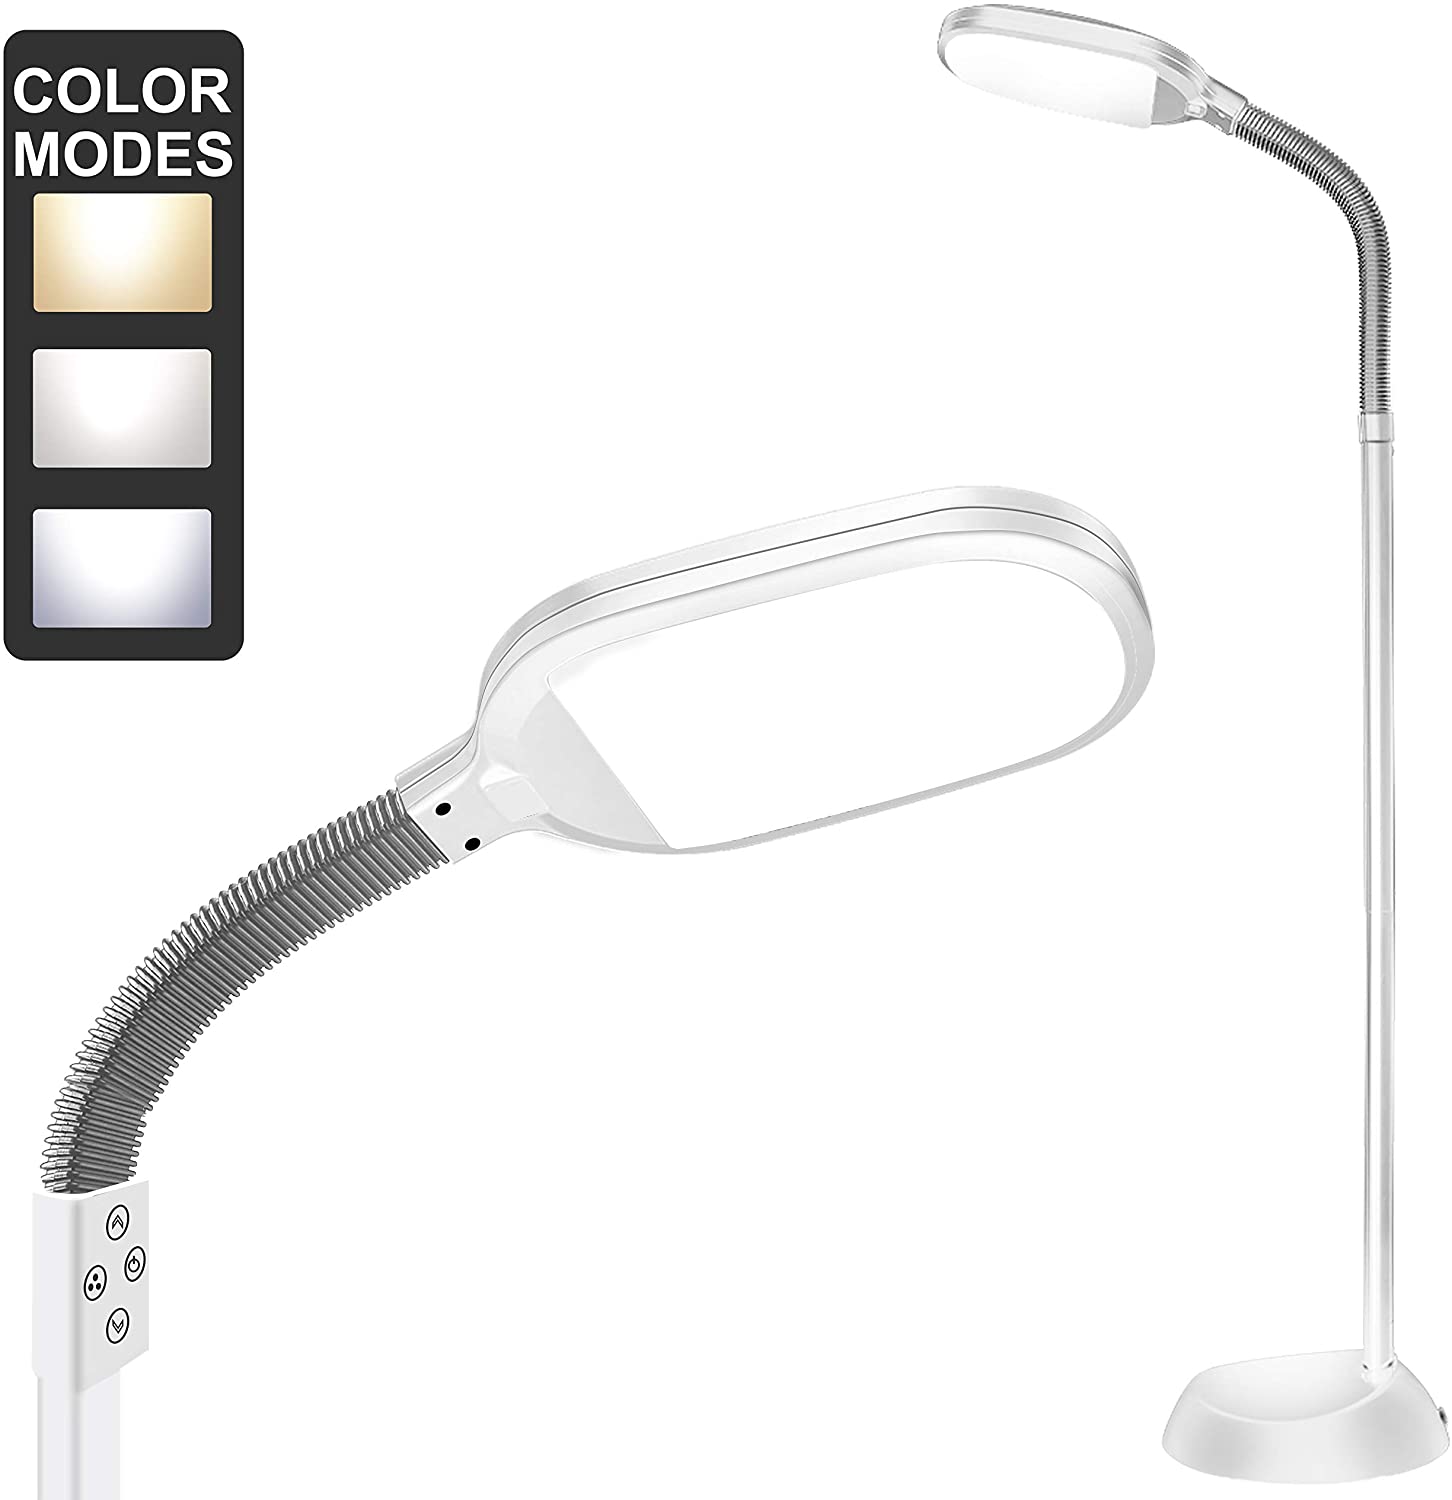 Addlon Dimmable LED Floor Lamp with 4 Brightness Levels & 3 Color Temperatures $29.99